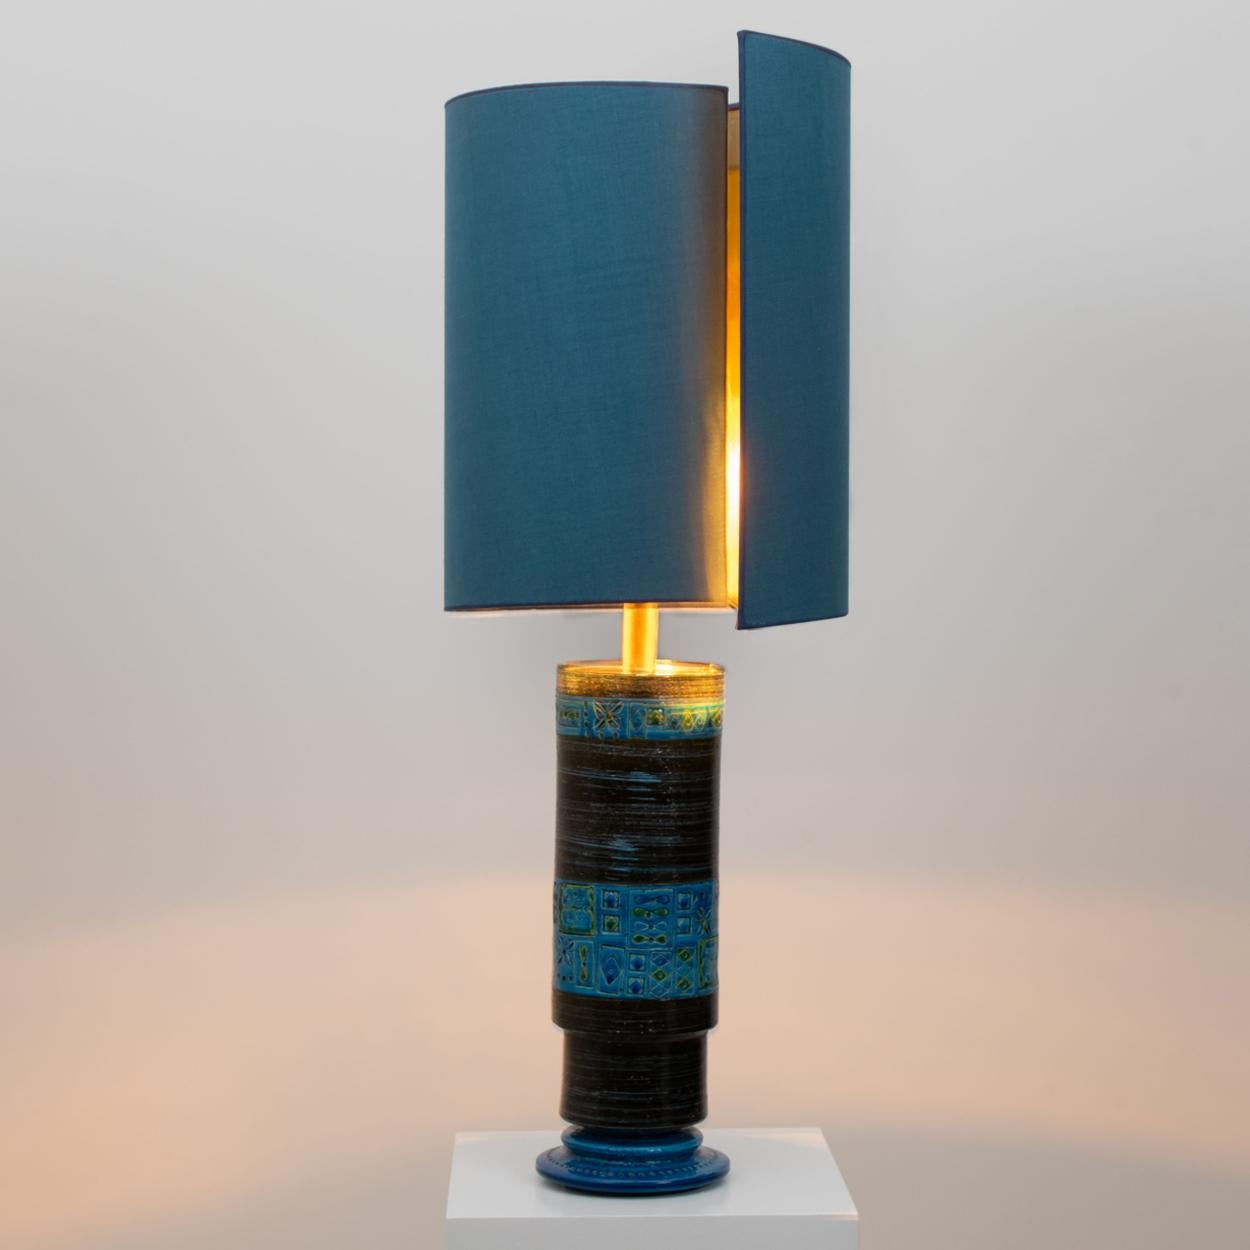 Exceptional pair of ceramic table lamp by Bitossi, Italy, 1960s. Sculptural pieces made of handmade ceramic in blue or grey or green tones, with a combination of dry and glazed finishes. With special new custom made blue silk lamp shades with warm